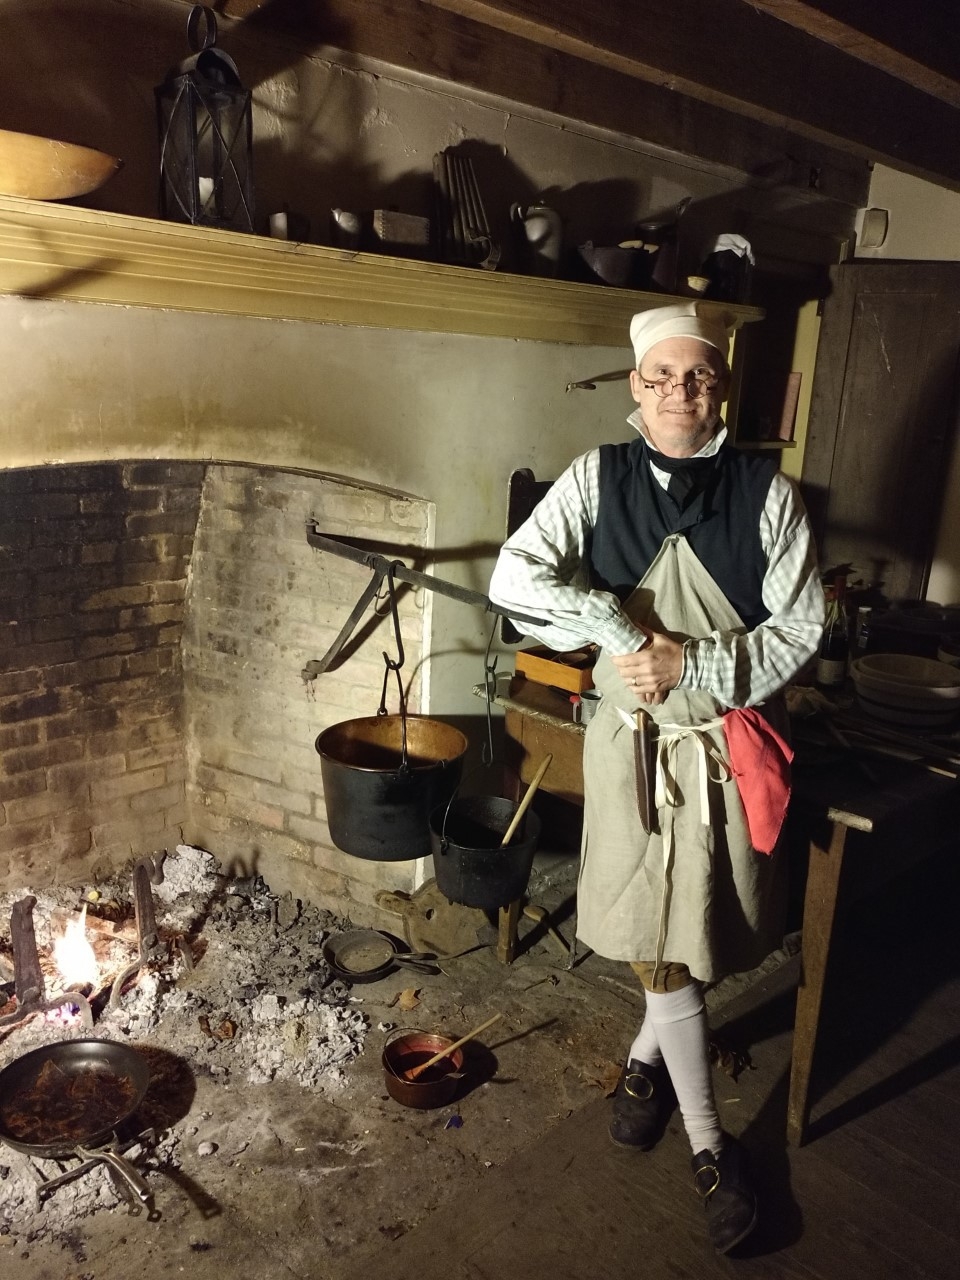 Steve Preston at his quarterly “Hearth Dinners” event where he cooks 18th and early 19th century foods in their 1804 kitchen for the public. The most popular and requested dish is the beef steak pie from the 1790s.